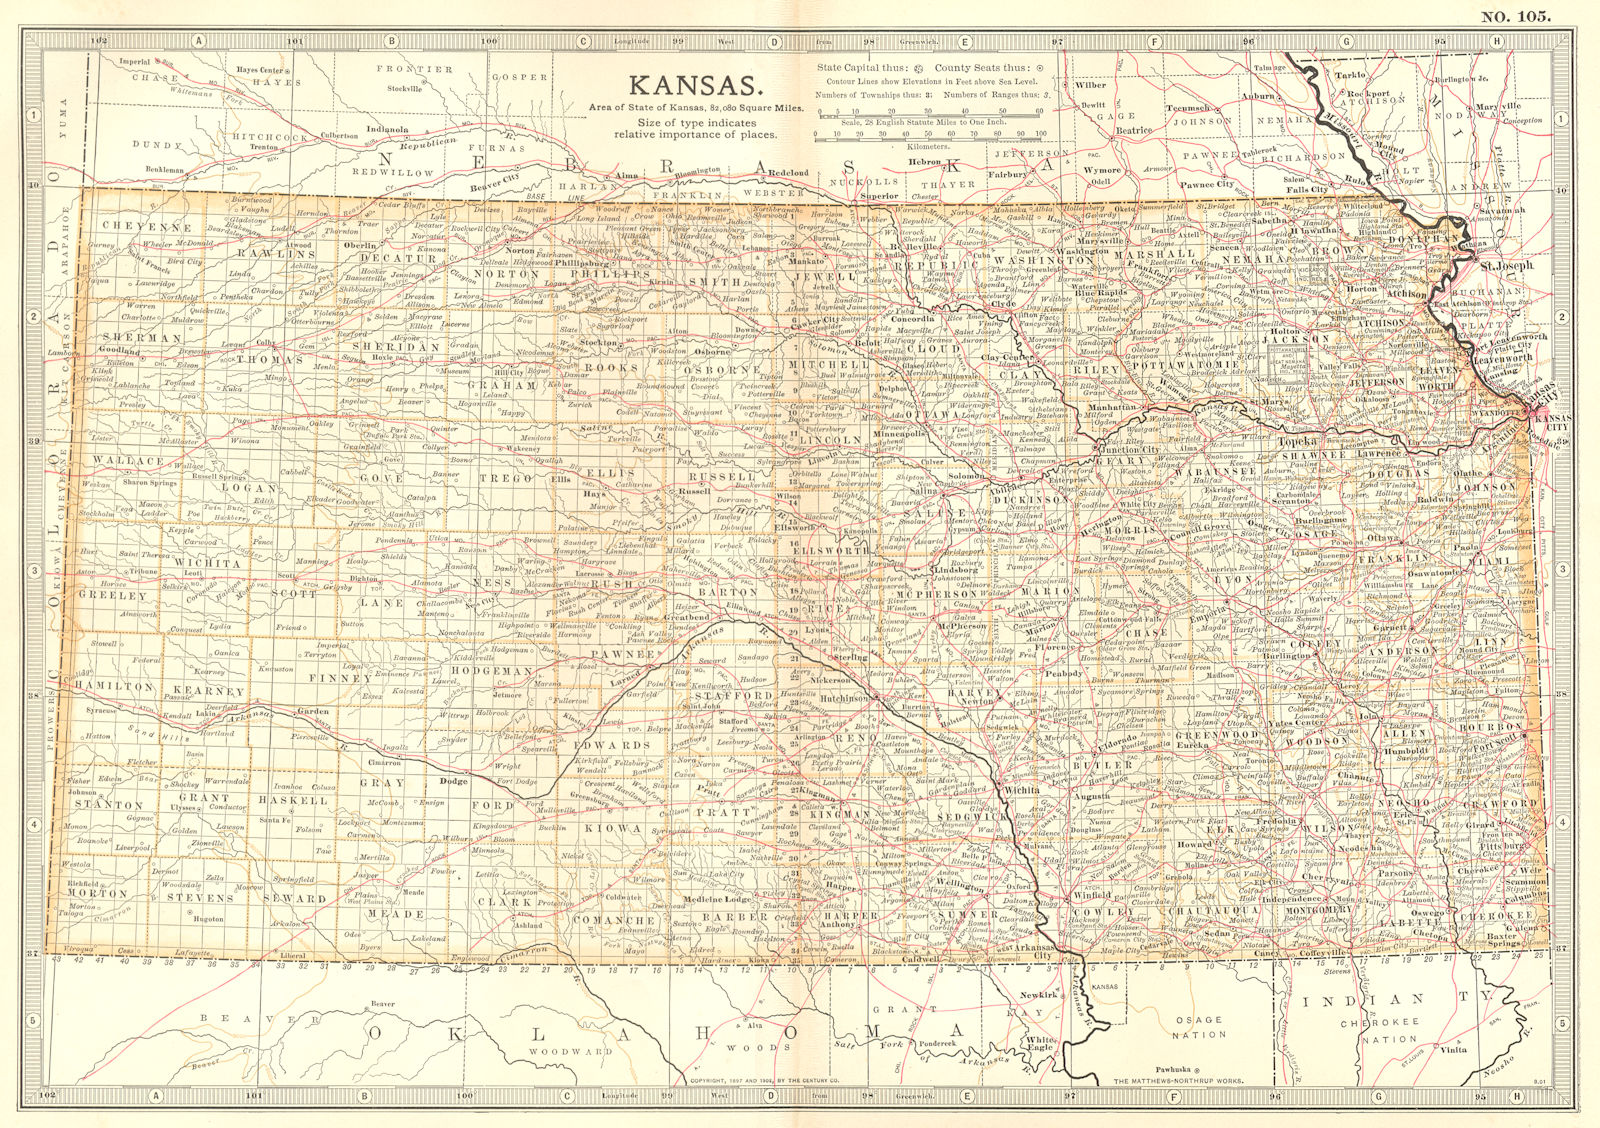 KANSAS. State map showing counties & Indian reservations. Britannica 1903